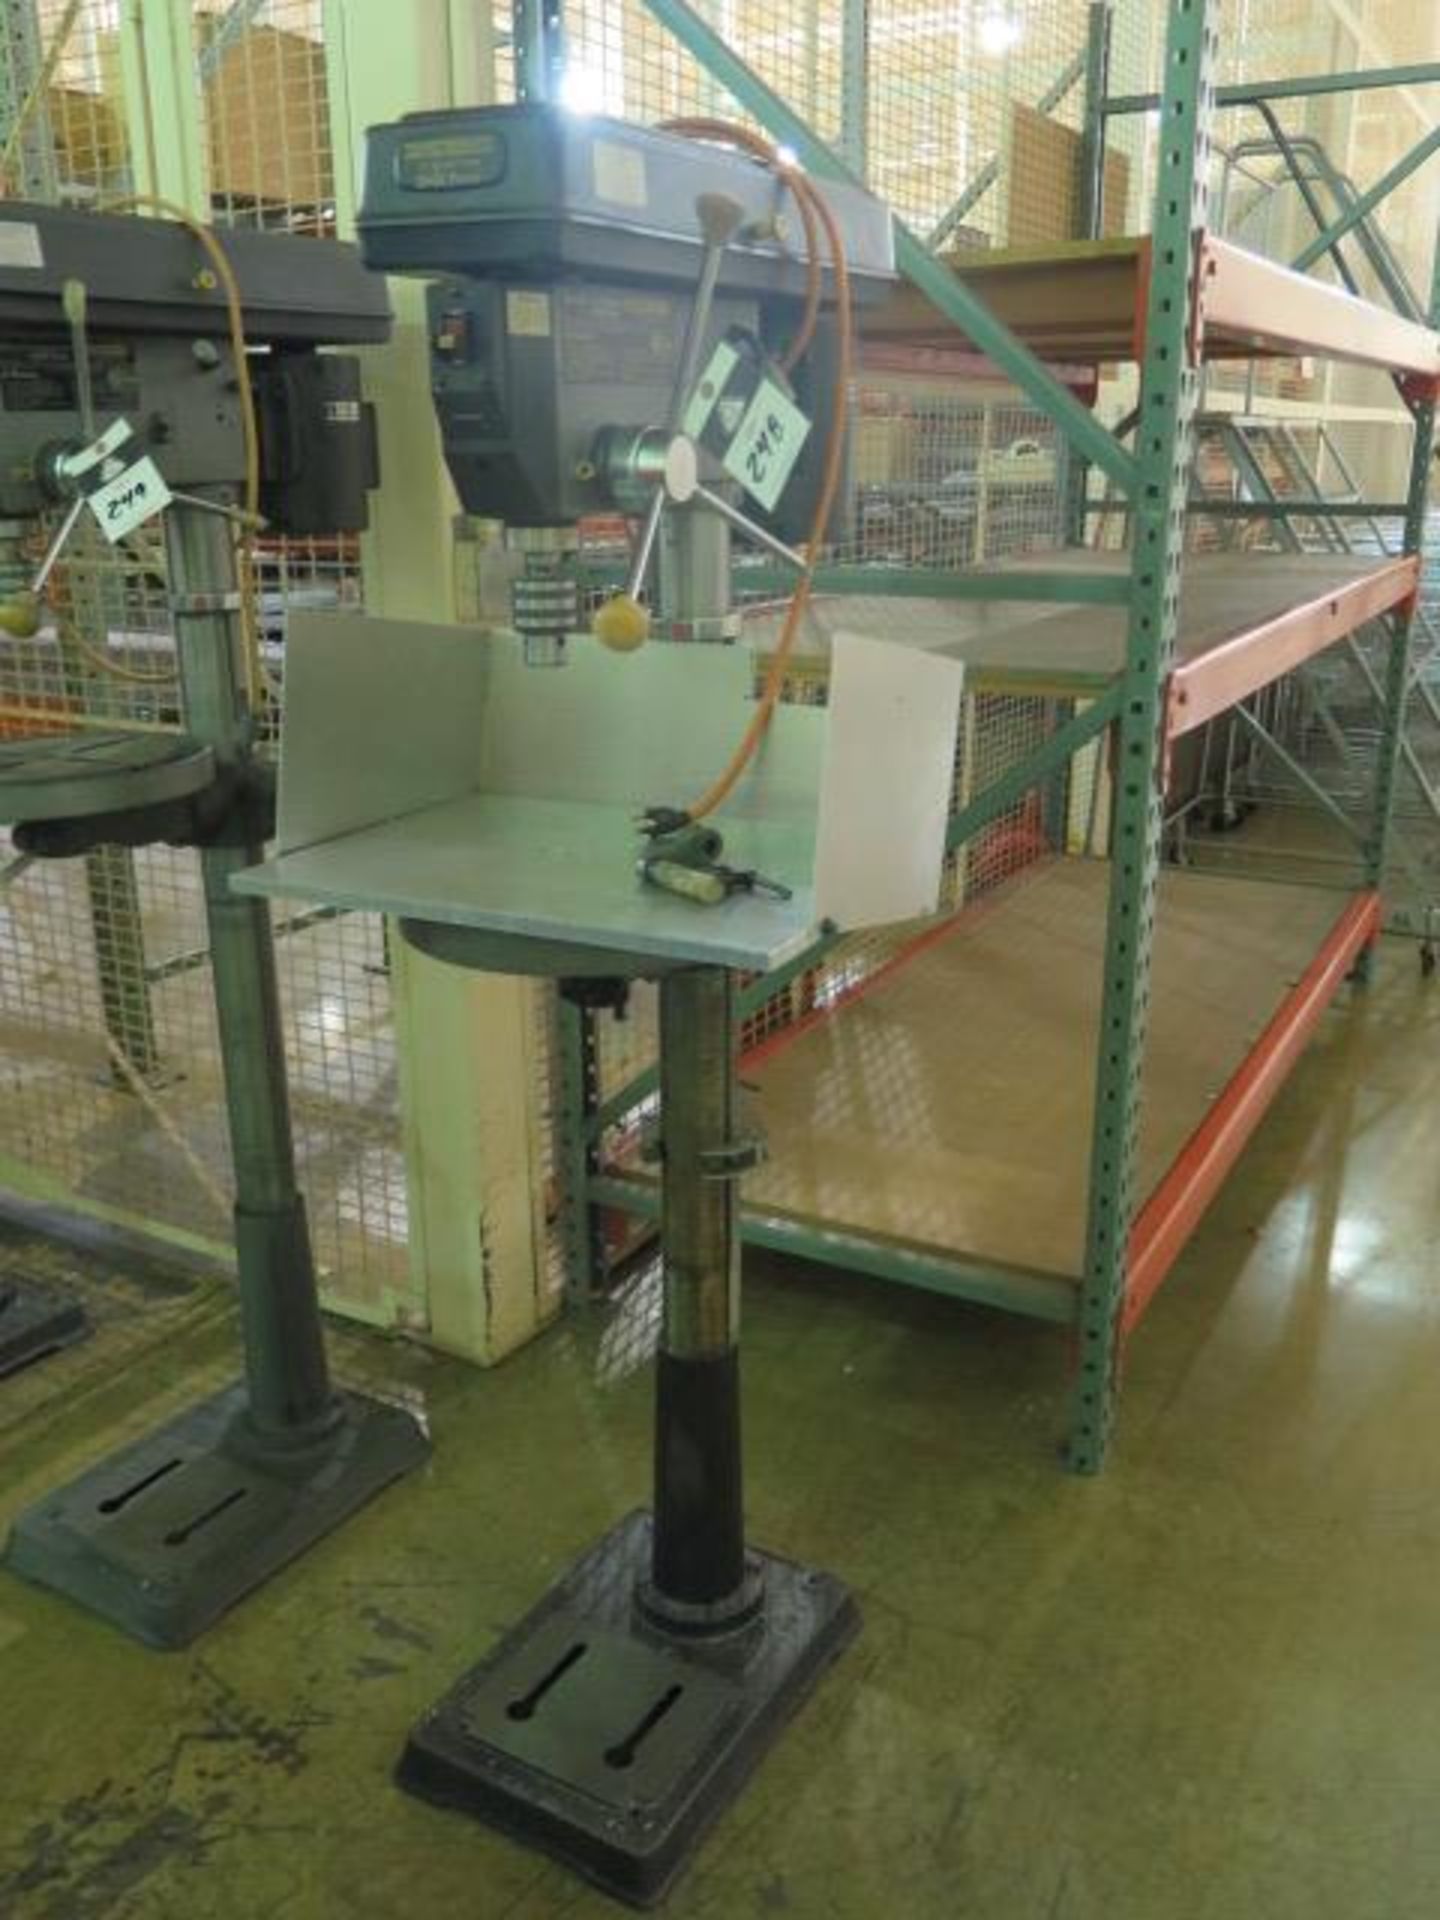 Central Machinery 16-Speed Pedestal Drill Press (SOLD AS-IS - NO WARRANTY)